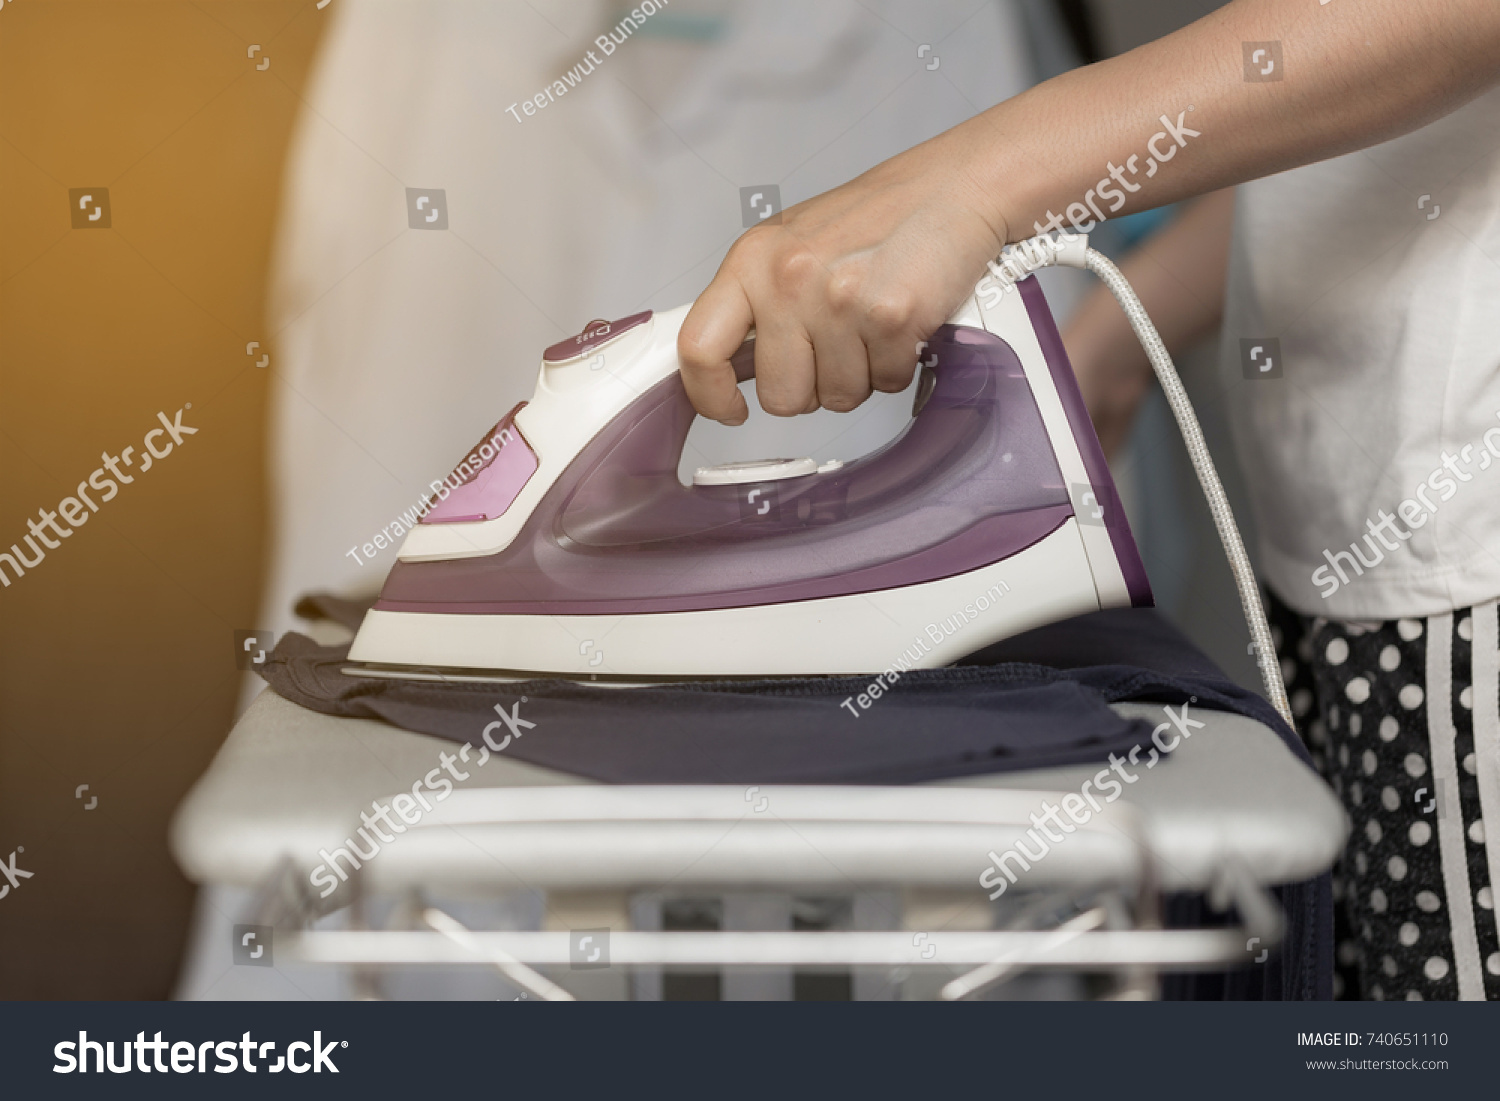 Young woman is using steam iron on her cloths #740651110